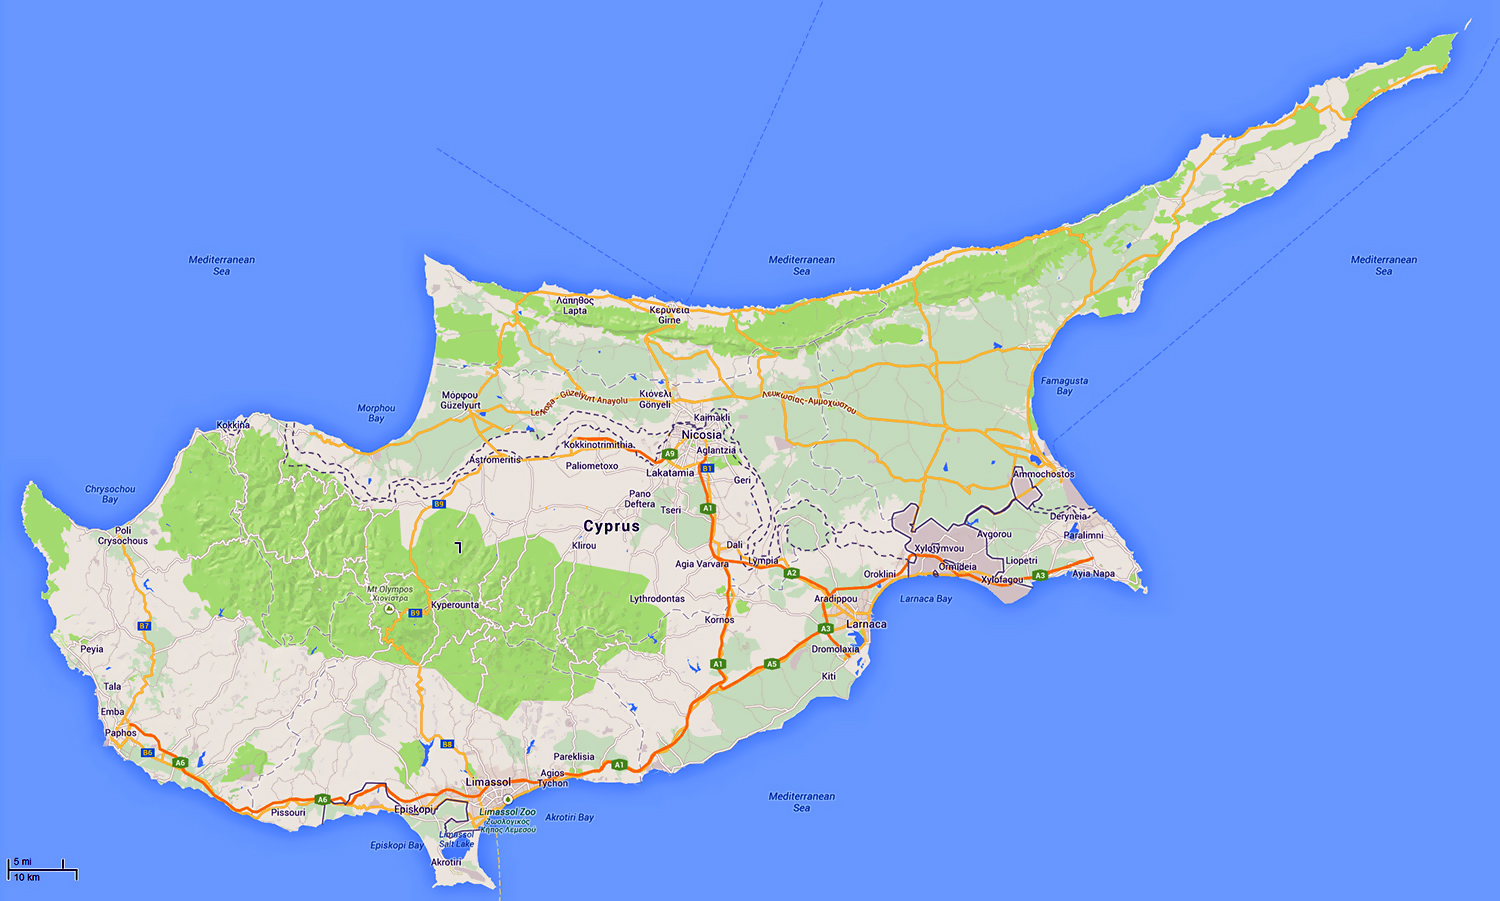 Large Detailed Road Map Of Cyprus Cyprus Large Detailed Road Map Images